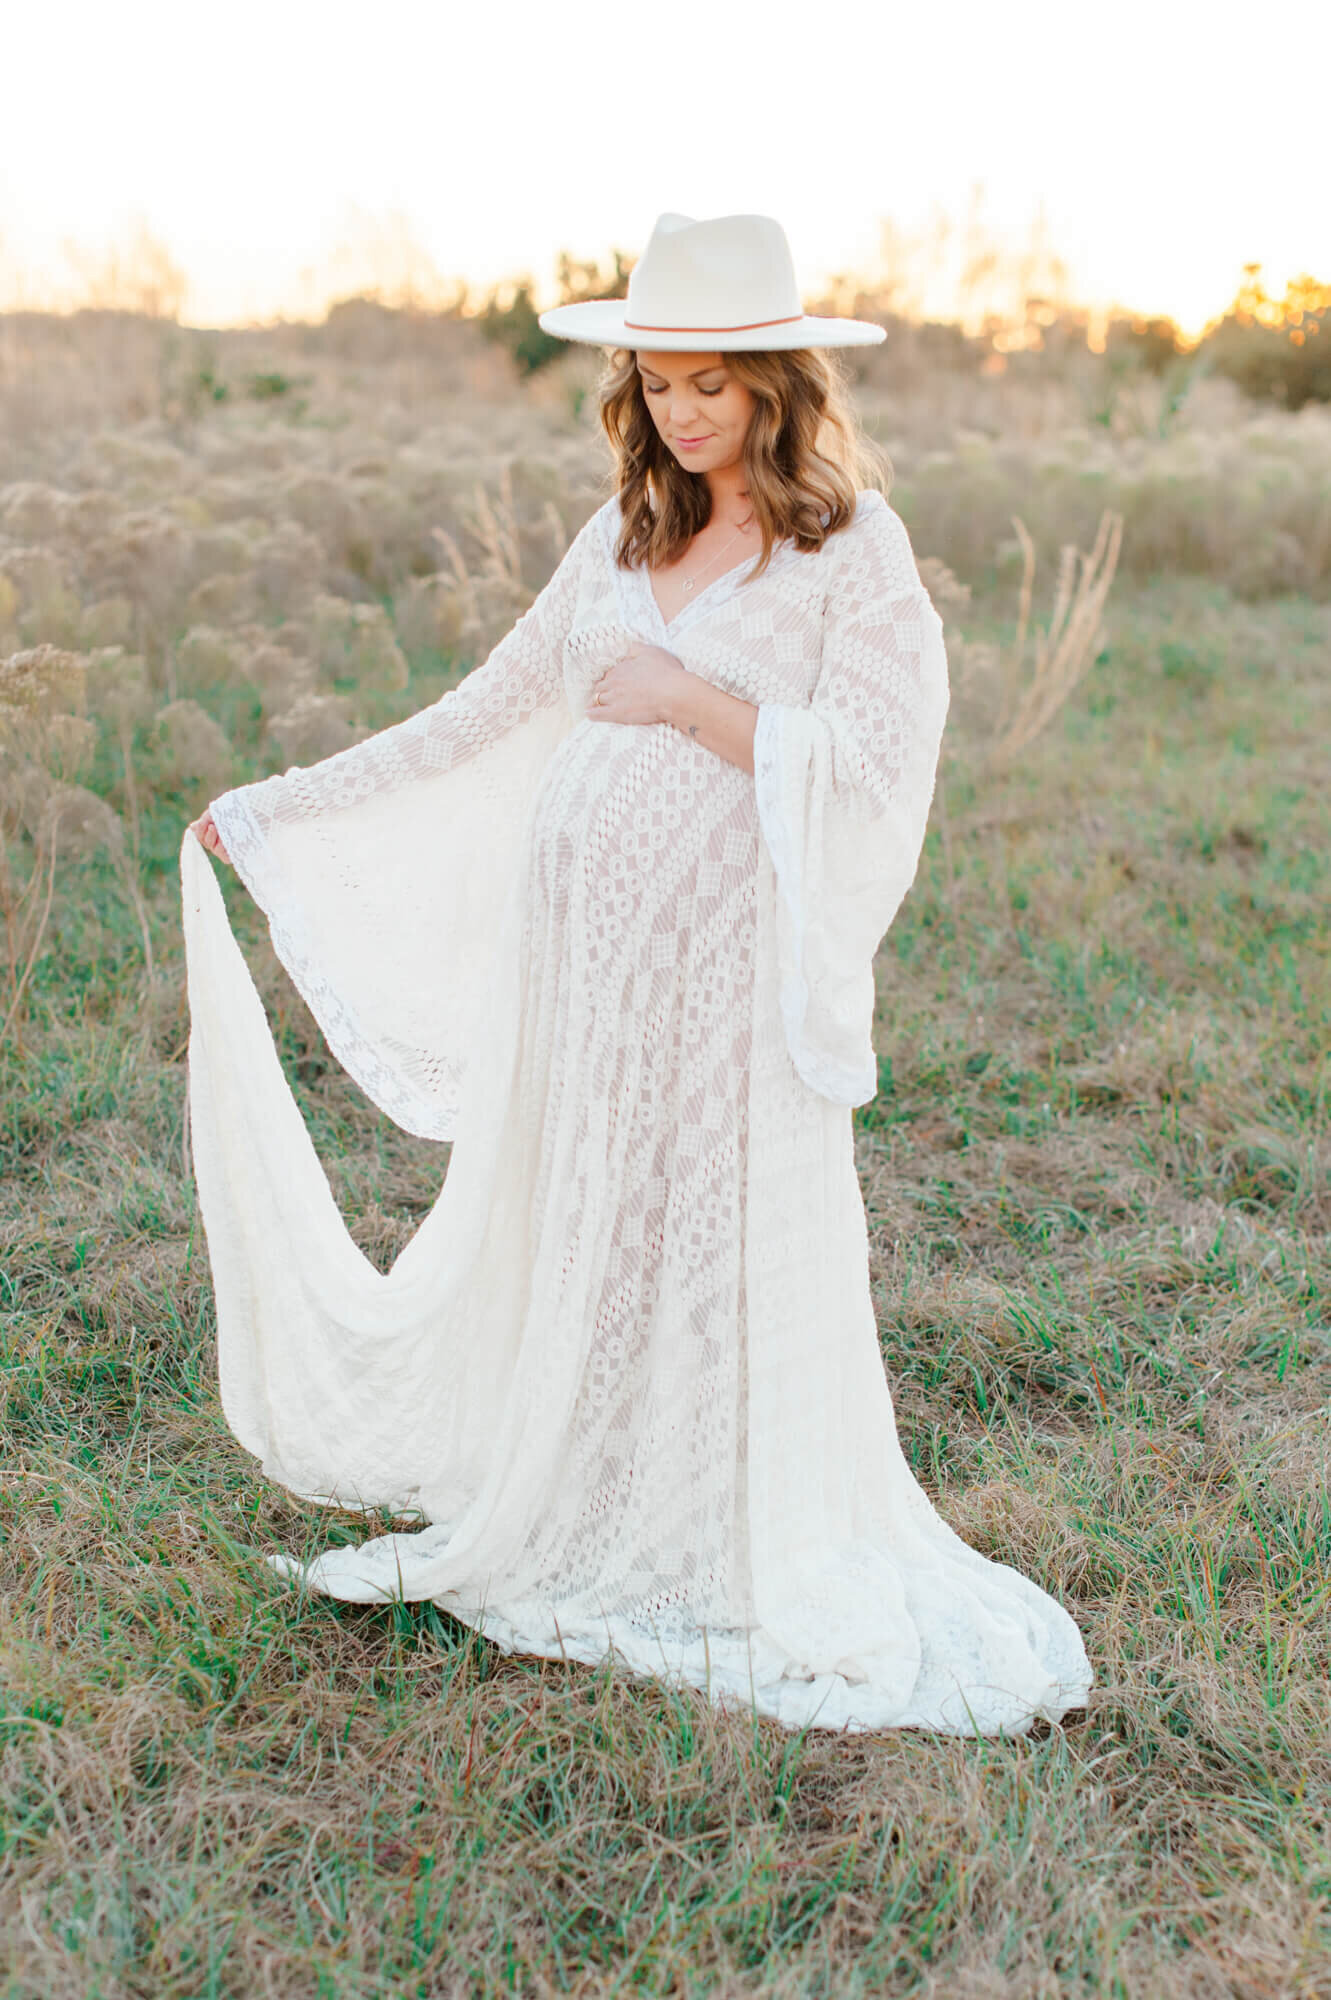 Pregnant mother stands holding her belly in a tall grass field waving her white lace gown in the wind